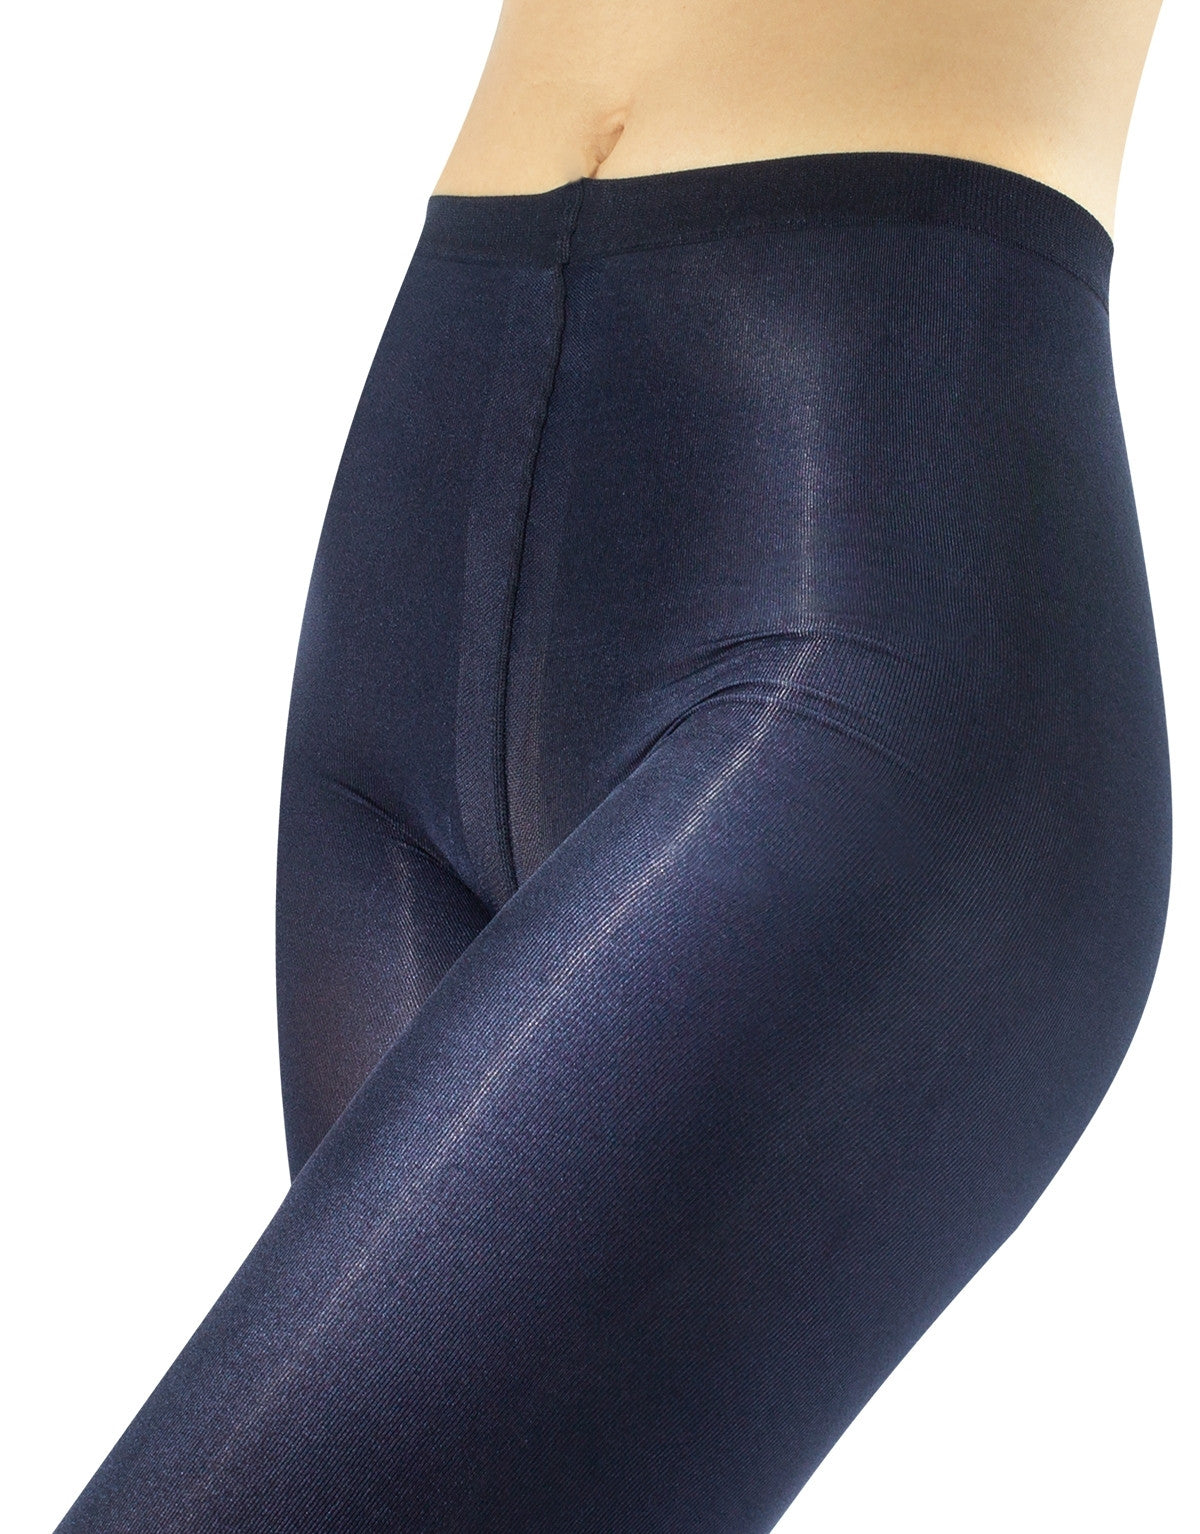 Calzitaly Glossy Tights - Navy blue ultra opaque tights with a shiny satin finish.